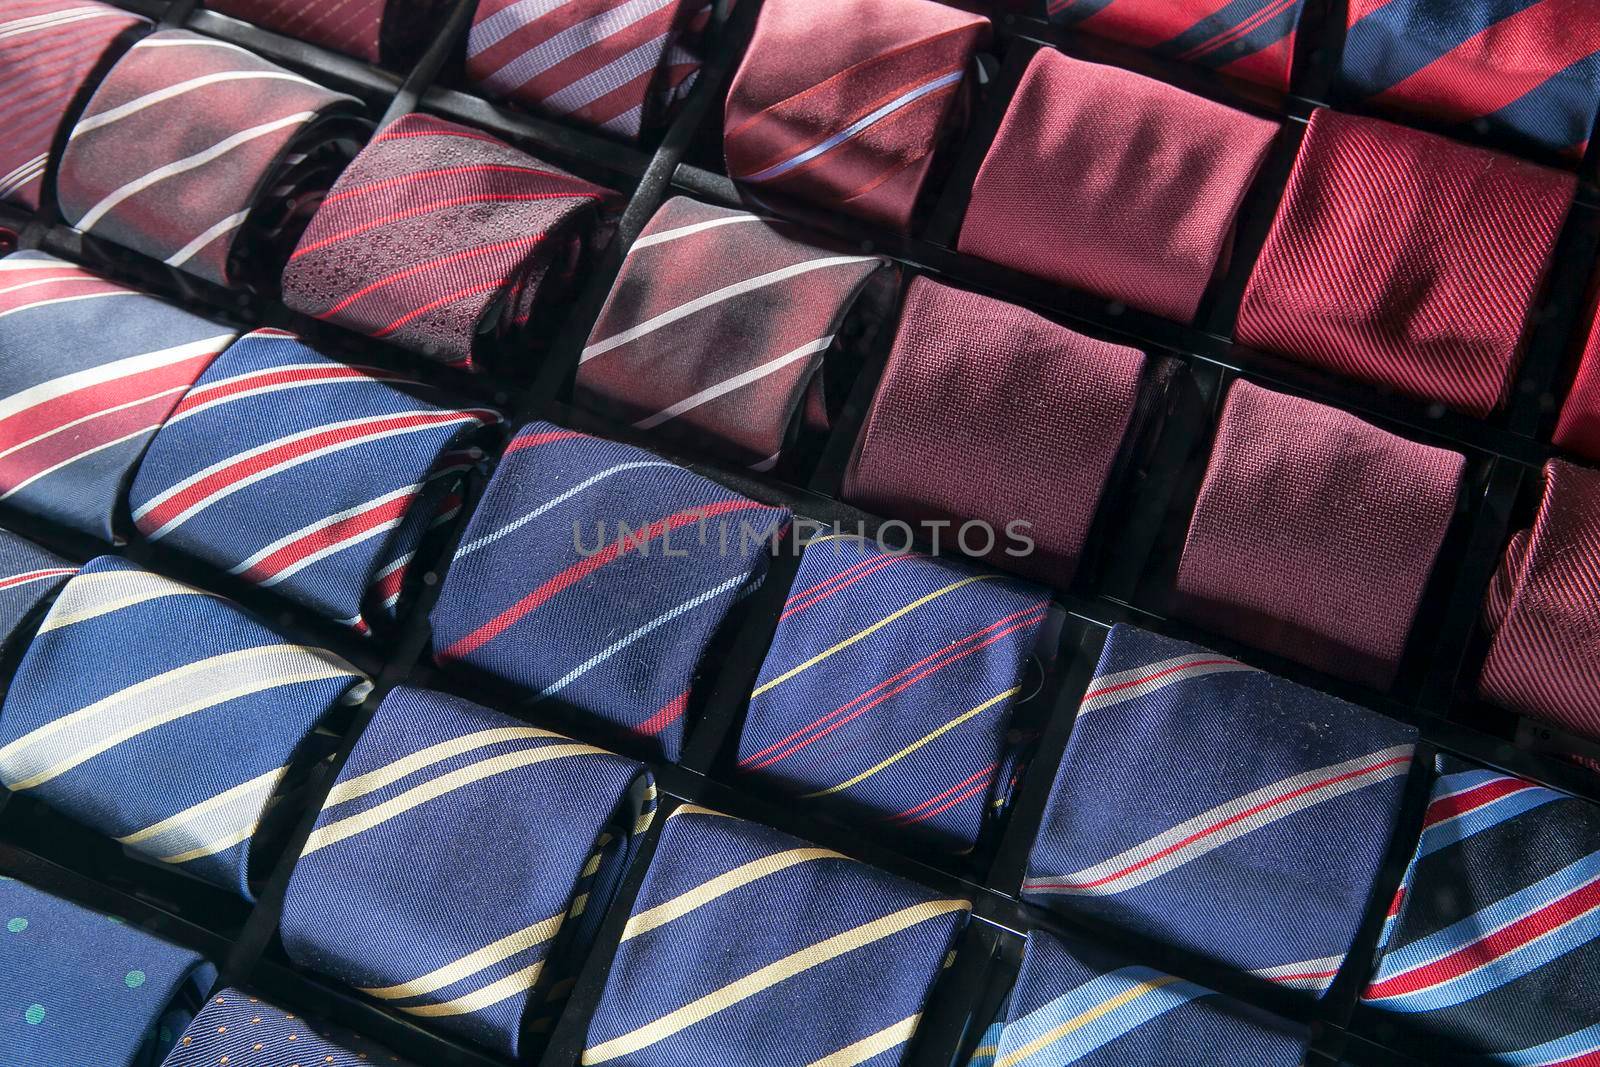 Men's silk ties are laid out from burgundy to blue in special compartments for ties by elenarostunova